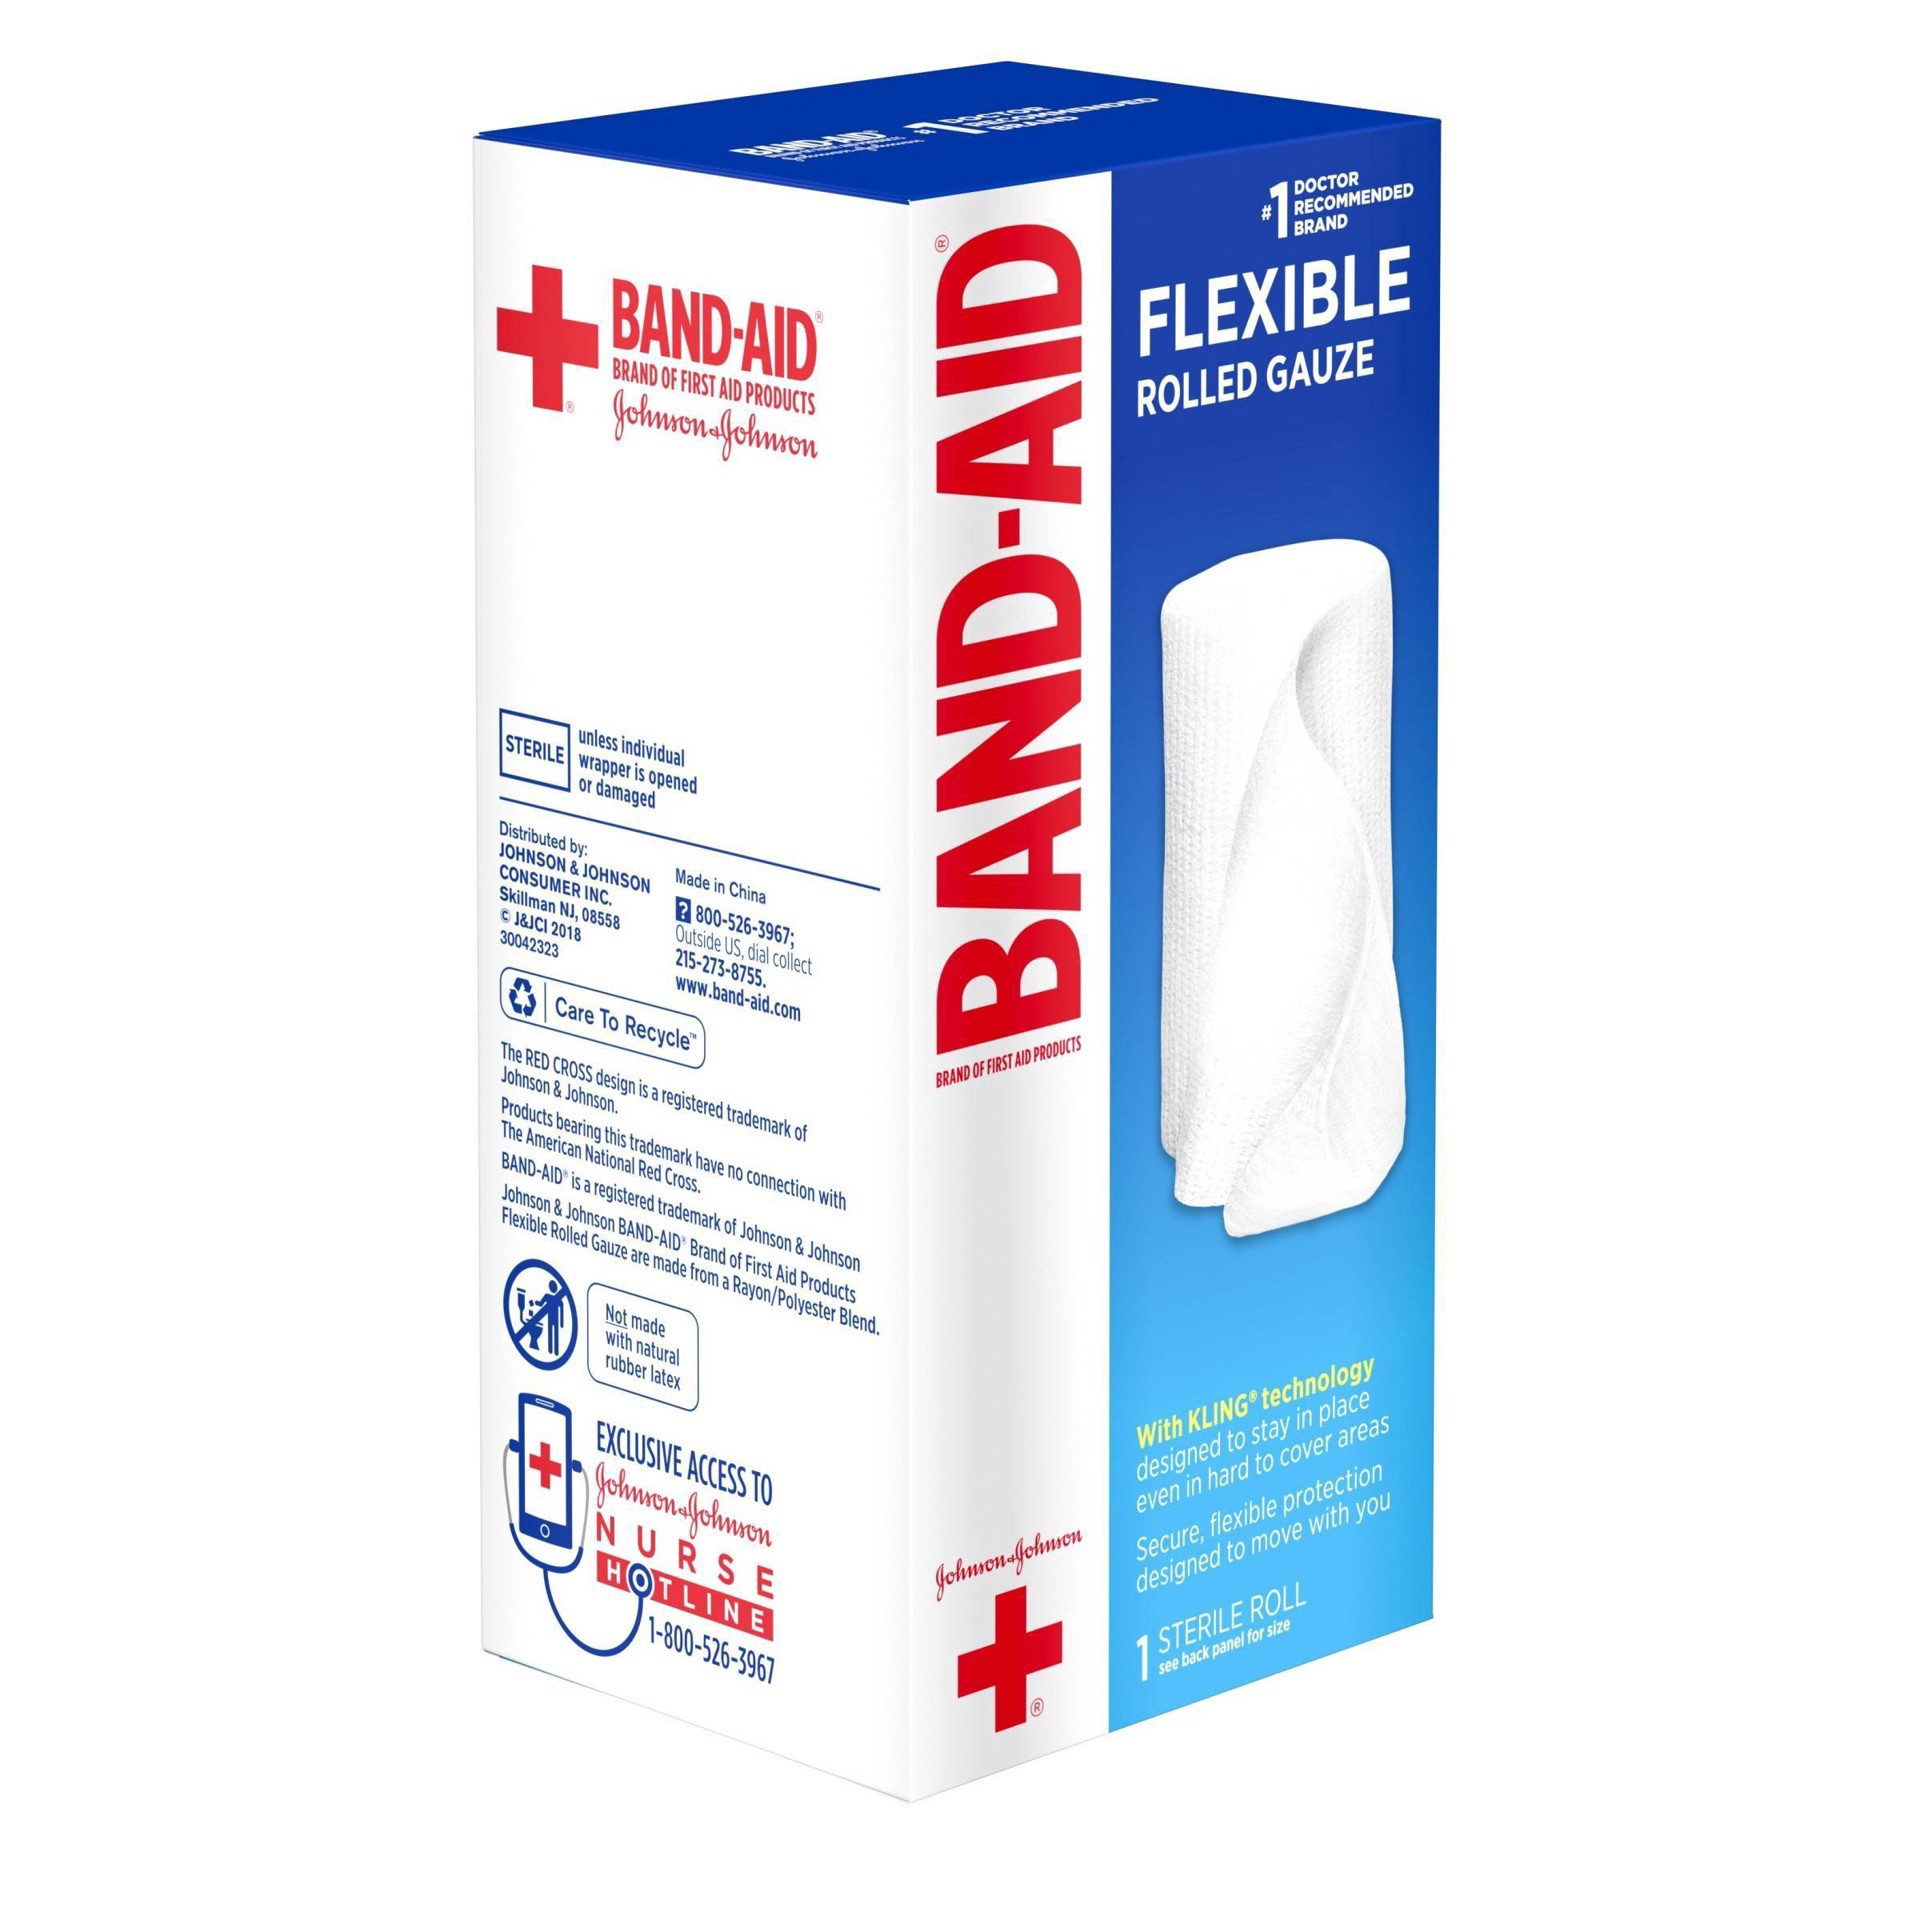 slide 12 of 15, BAND-AID Band Aid Brand of First Aid Products Flexible Rolled Gauze Dressing for Minor Wound Care, soft Padding and Instant Absorption, 4 Inches by 2.5 Yards, 1 ct